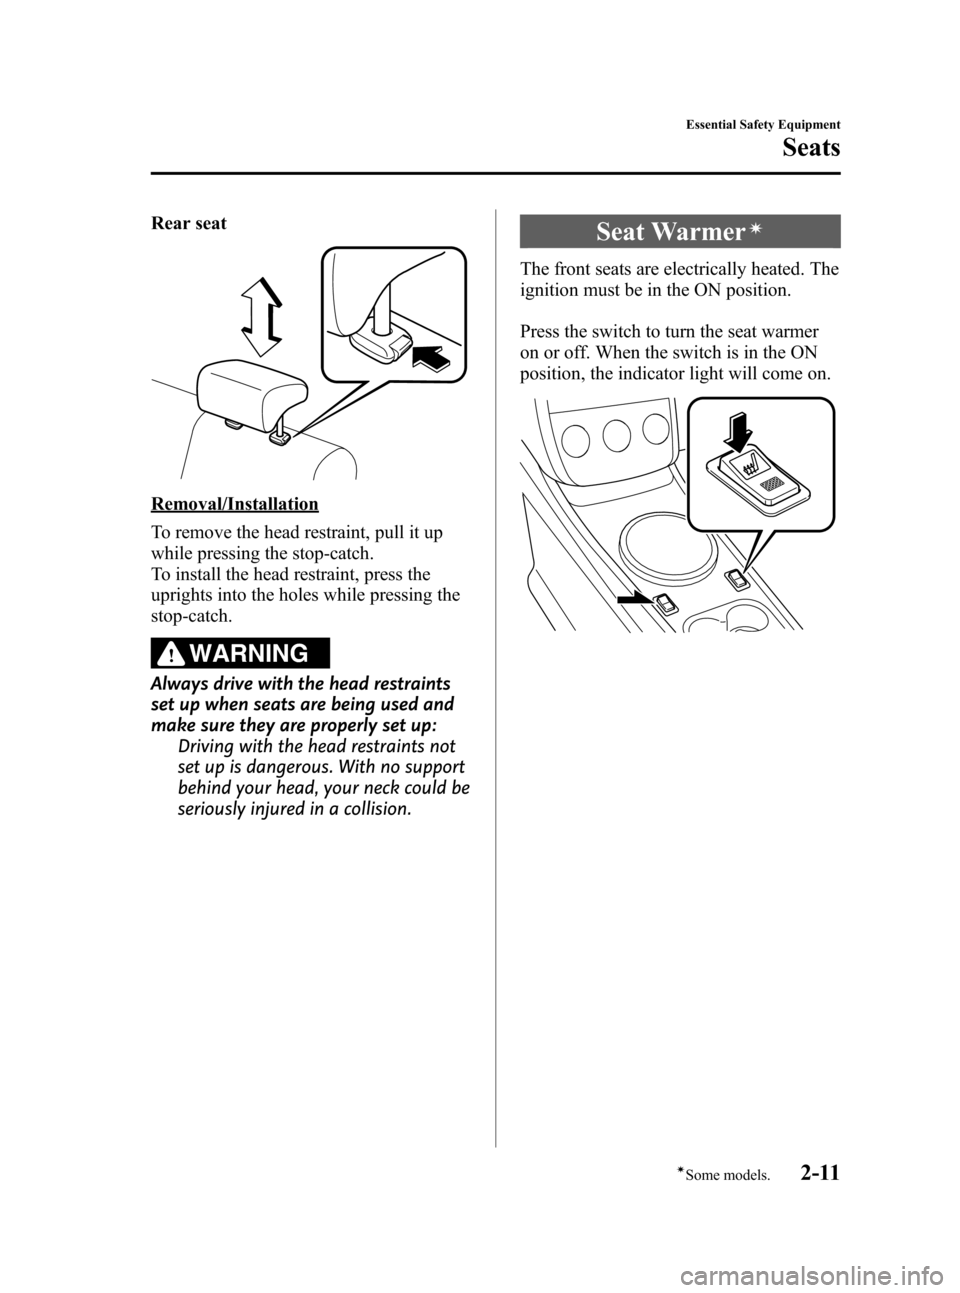 MAZDA MODEL CX-7 2009   (in English) Owners Manual Black plate (23,1)
Rear seat
Removal/Installation
To remove the head restraint, pull it up
while pressing the stop-catch.
To install the head restraint, press the
uprights into the holes while pressin